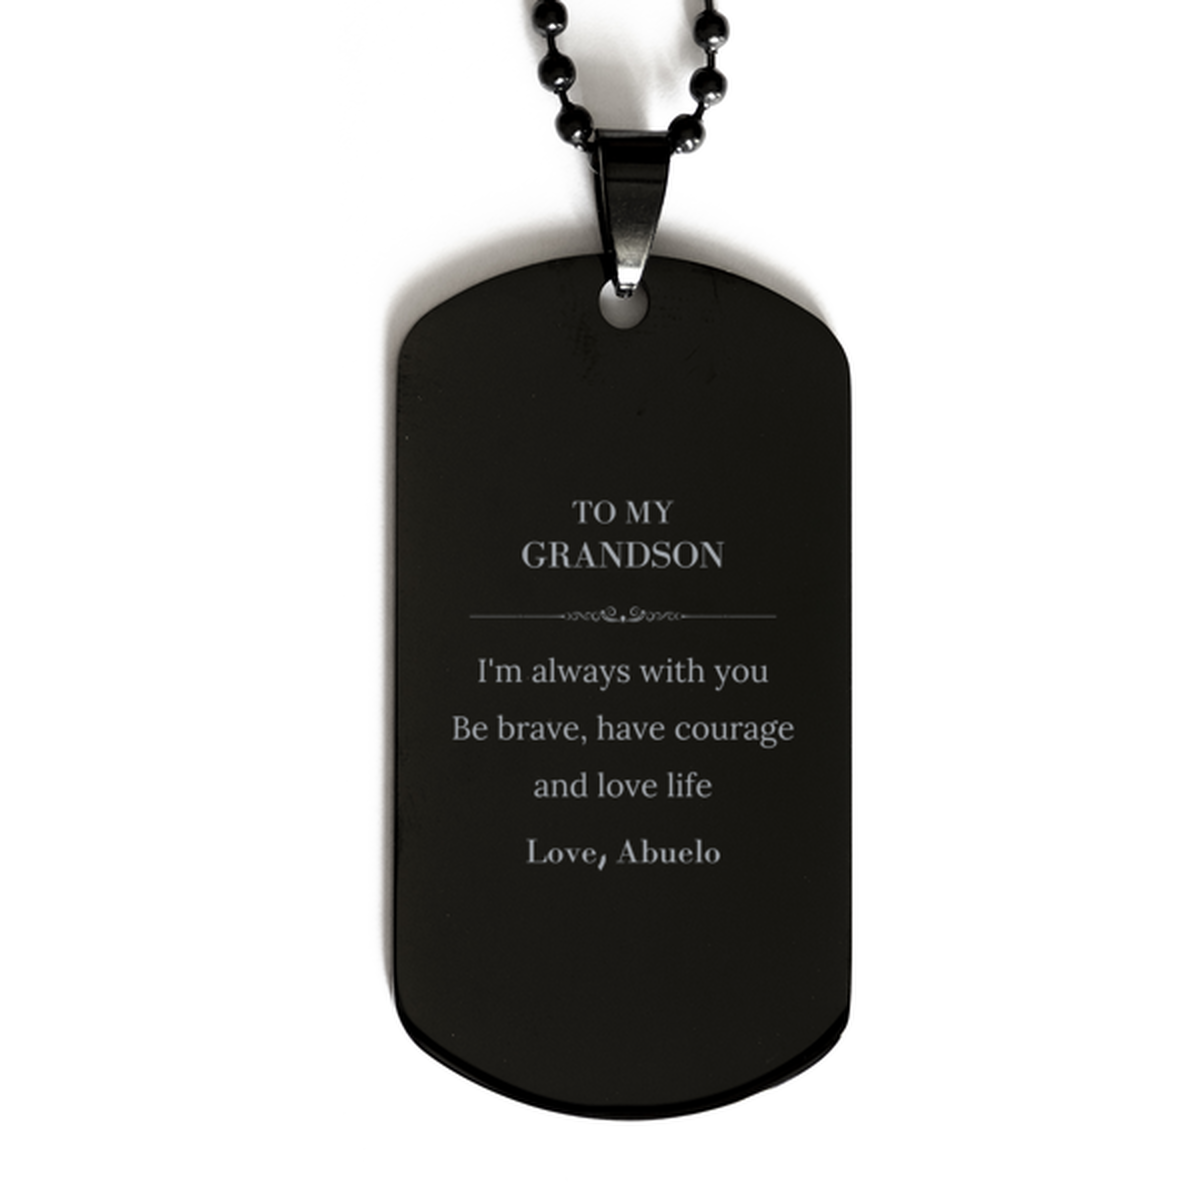 To My Grandson Gifts from Abuelo, Unique Black Dog Tag Inspirational Christmas Birthday Graduation Gifts for Grandson I'm always with you. Be brave, have courage and love life. Love, Abuelo